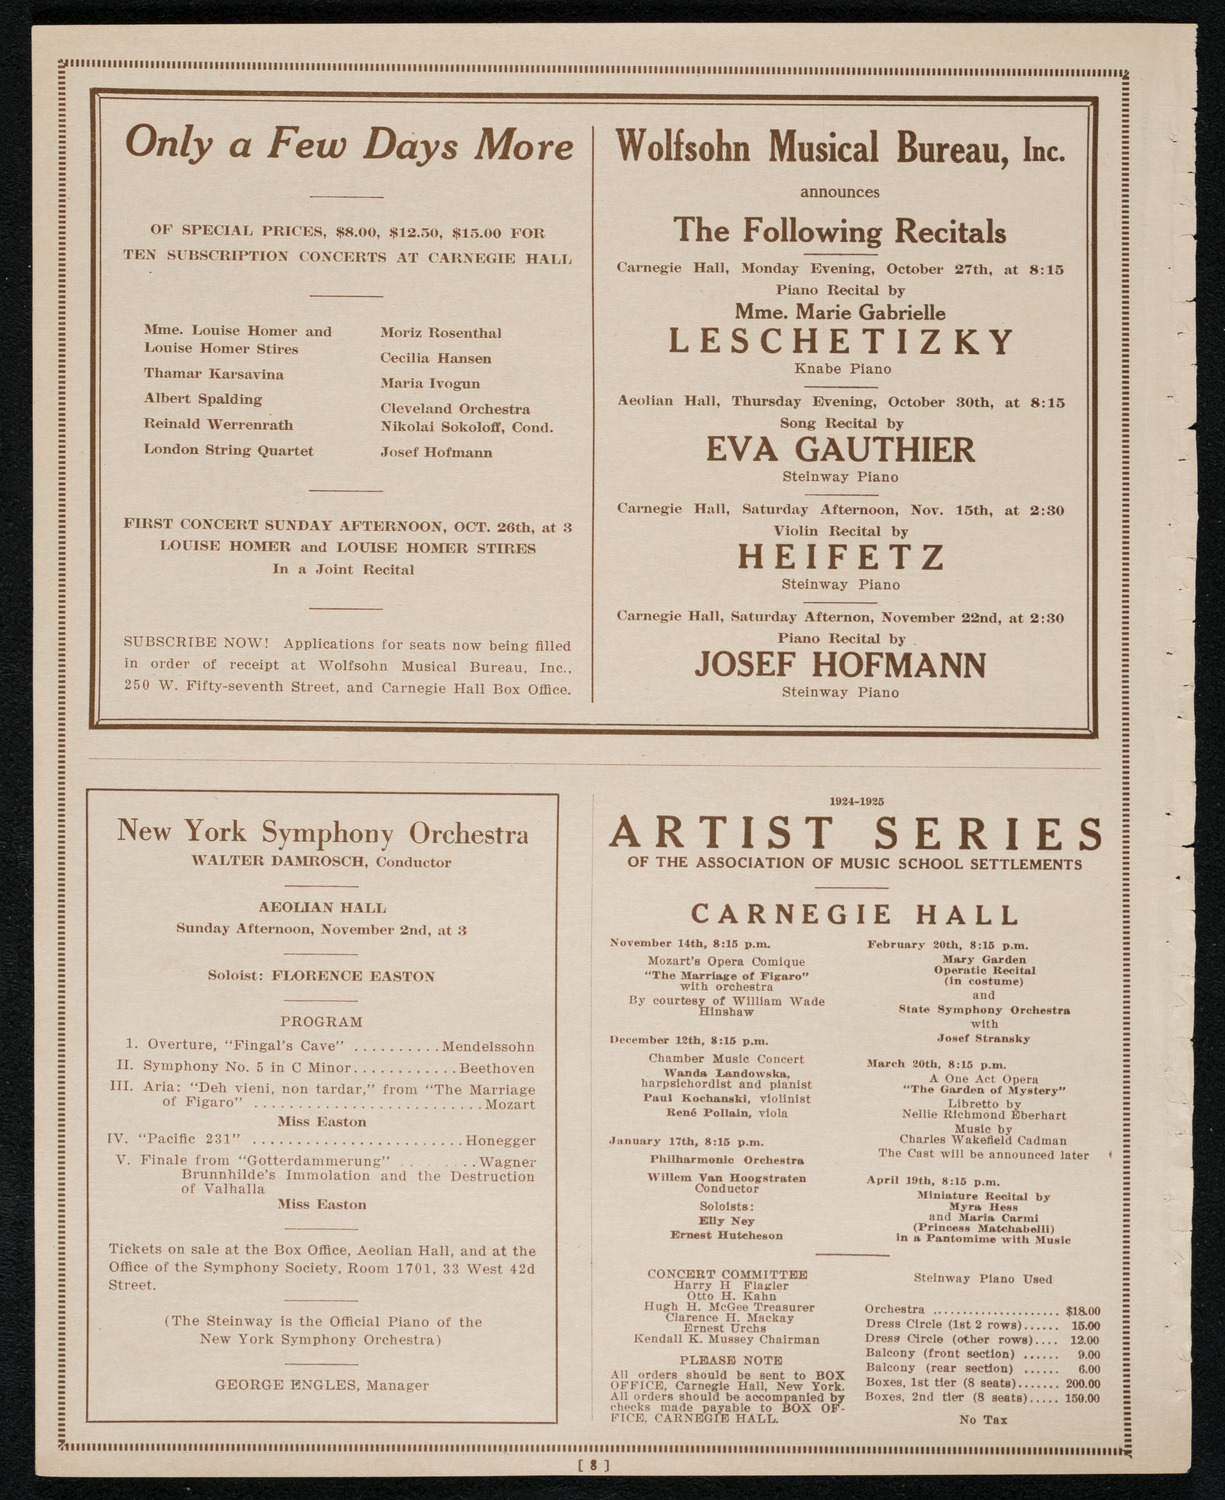 Louise Homer, Contralto, and Louise Homer Stires, Soprano, October 26, 1924, program page 8